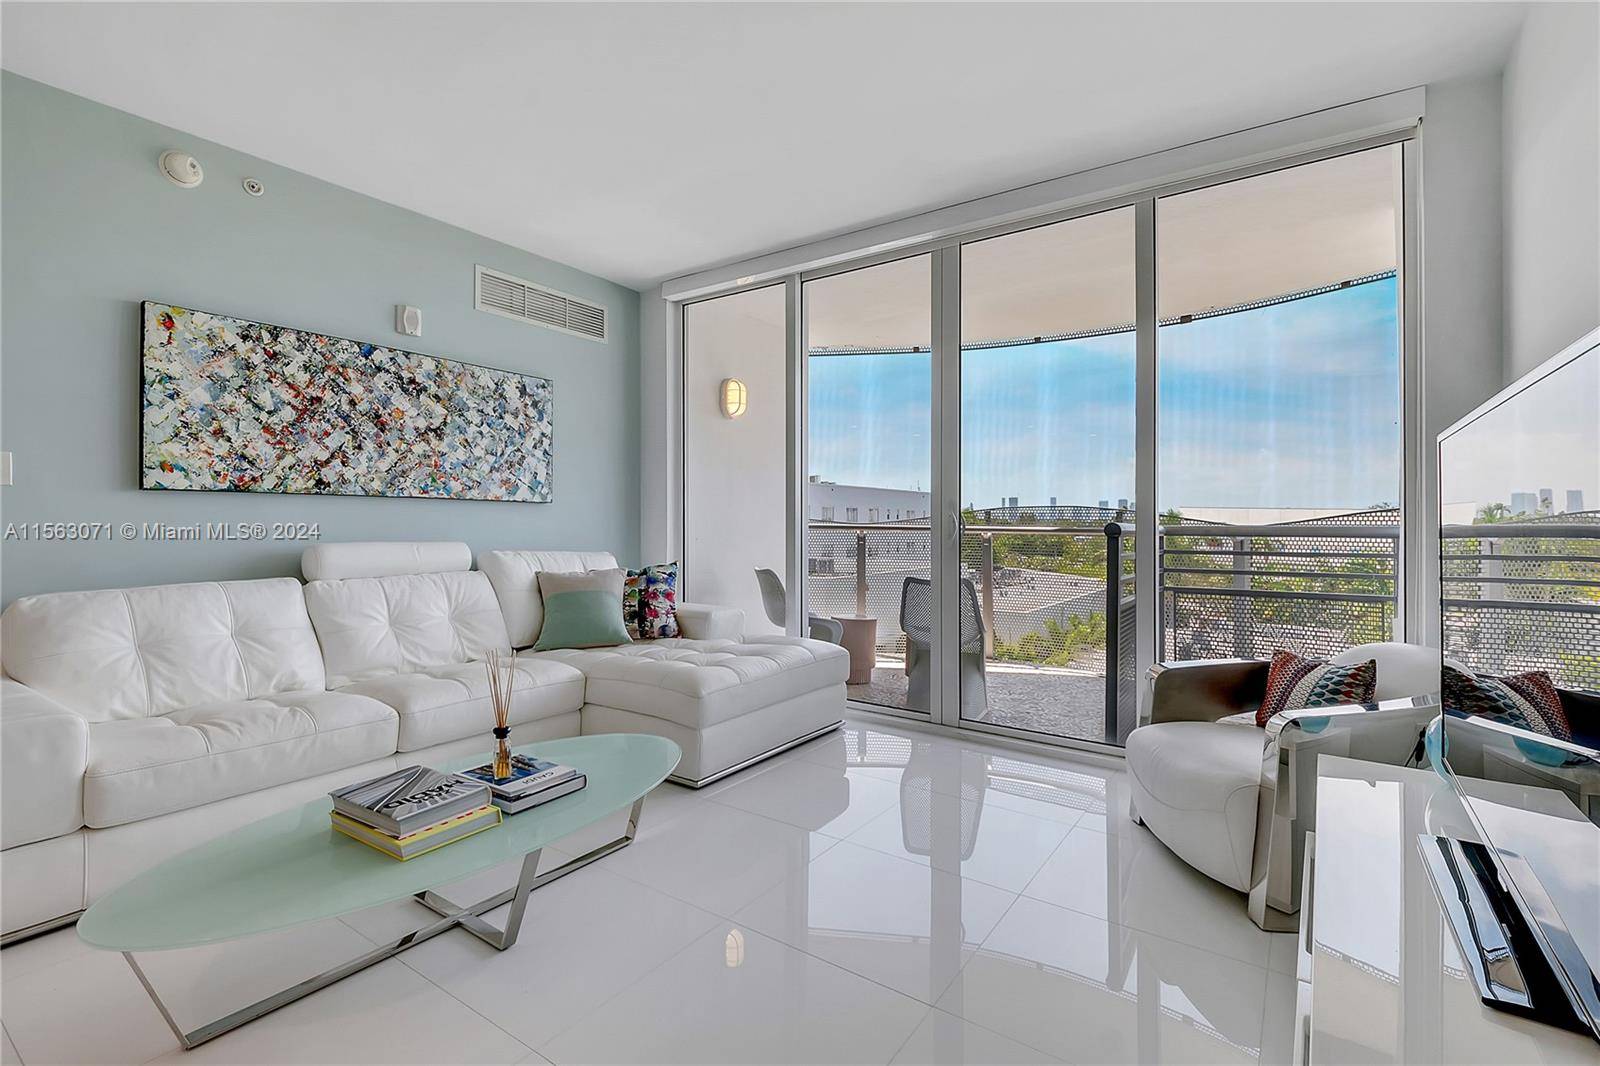 A modern escape in this pristine high floor fully furnished unit at Artecity North, ideally situated just two blocks from the ocean.